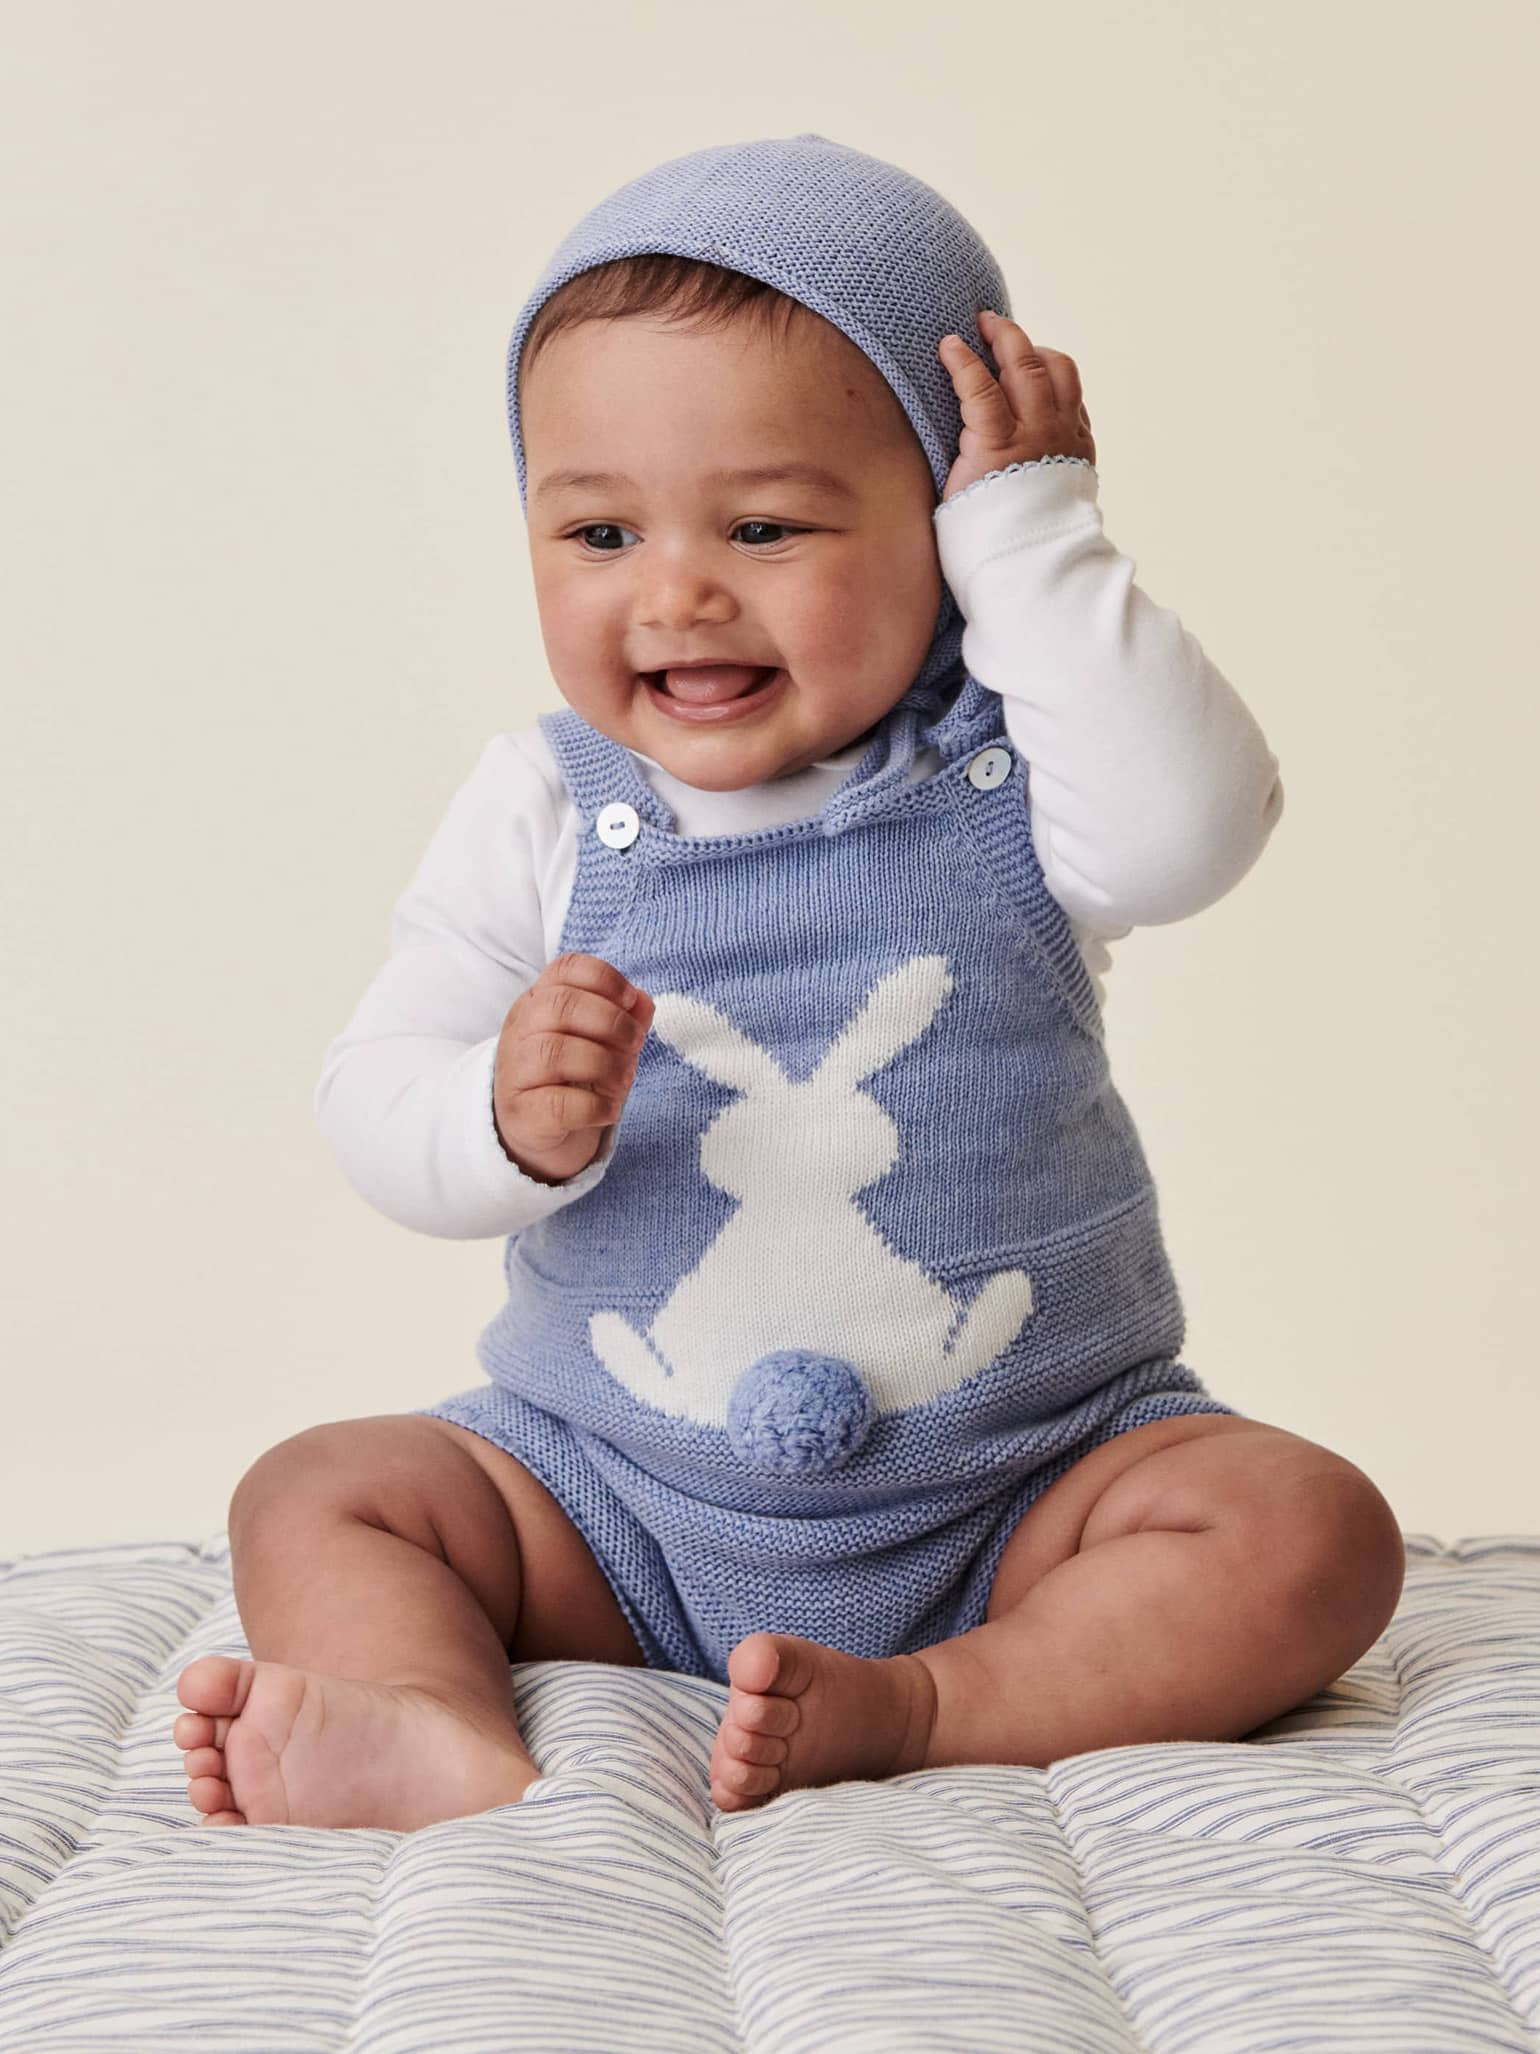 Blue Crispa Cotton Bunny Baby Knitted Dungarees